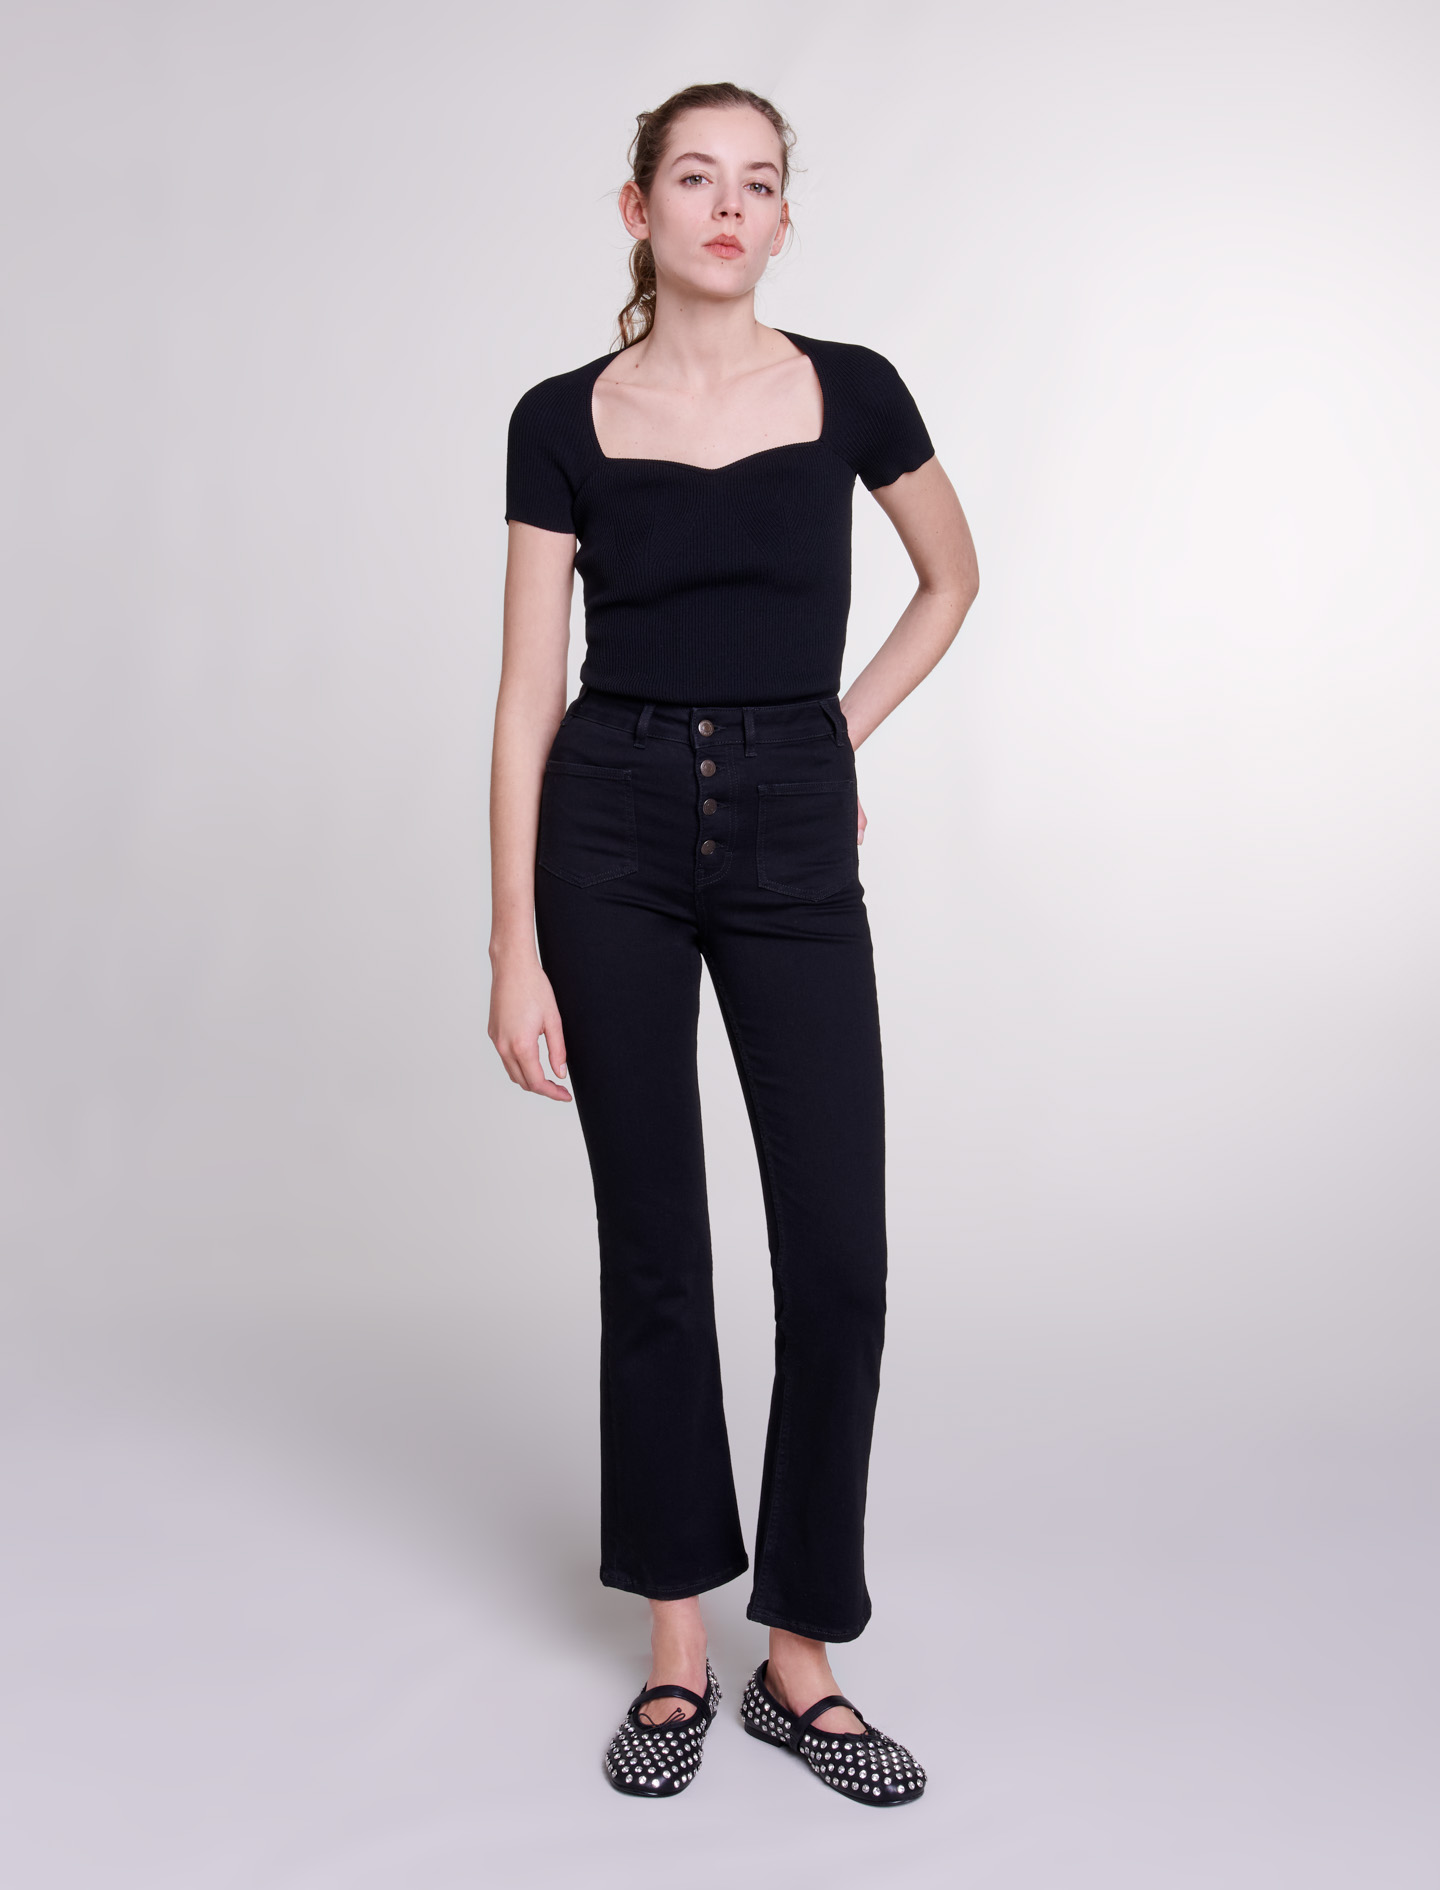 Maje Woman's cotton, Jeans with pockets, flared at the bottom for Spring/Summer, in color Black / Black